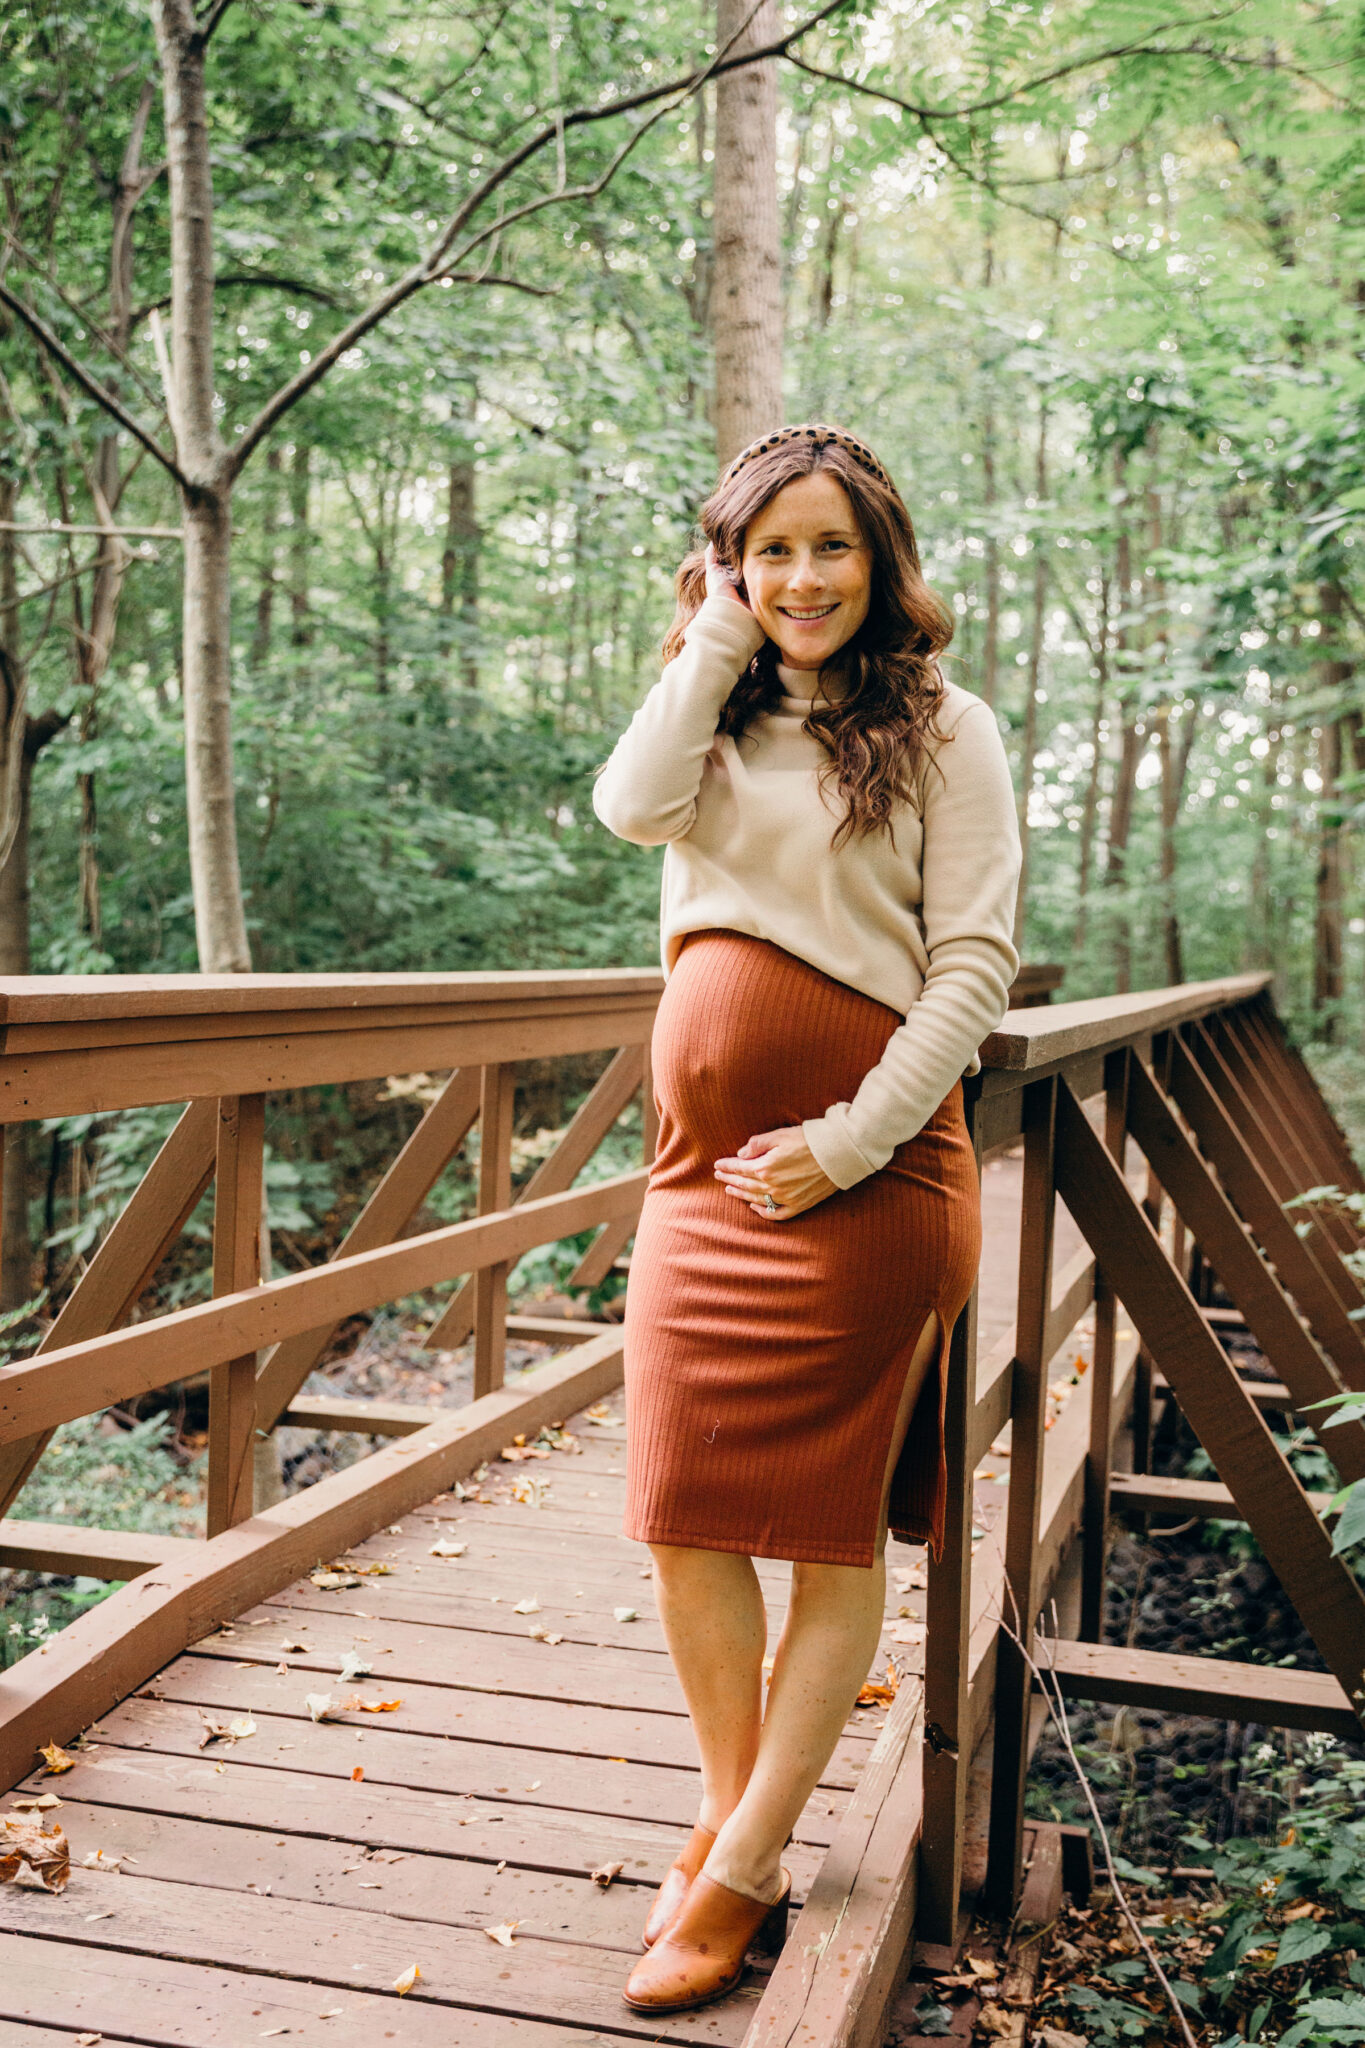 shirt tucked in bra above baby bump with pencil skirt